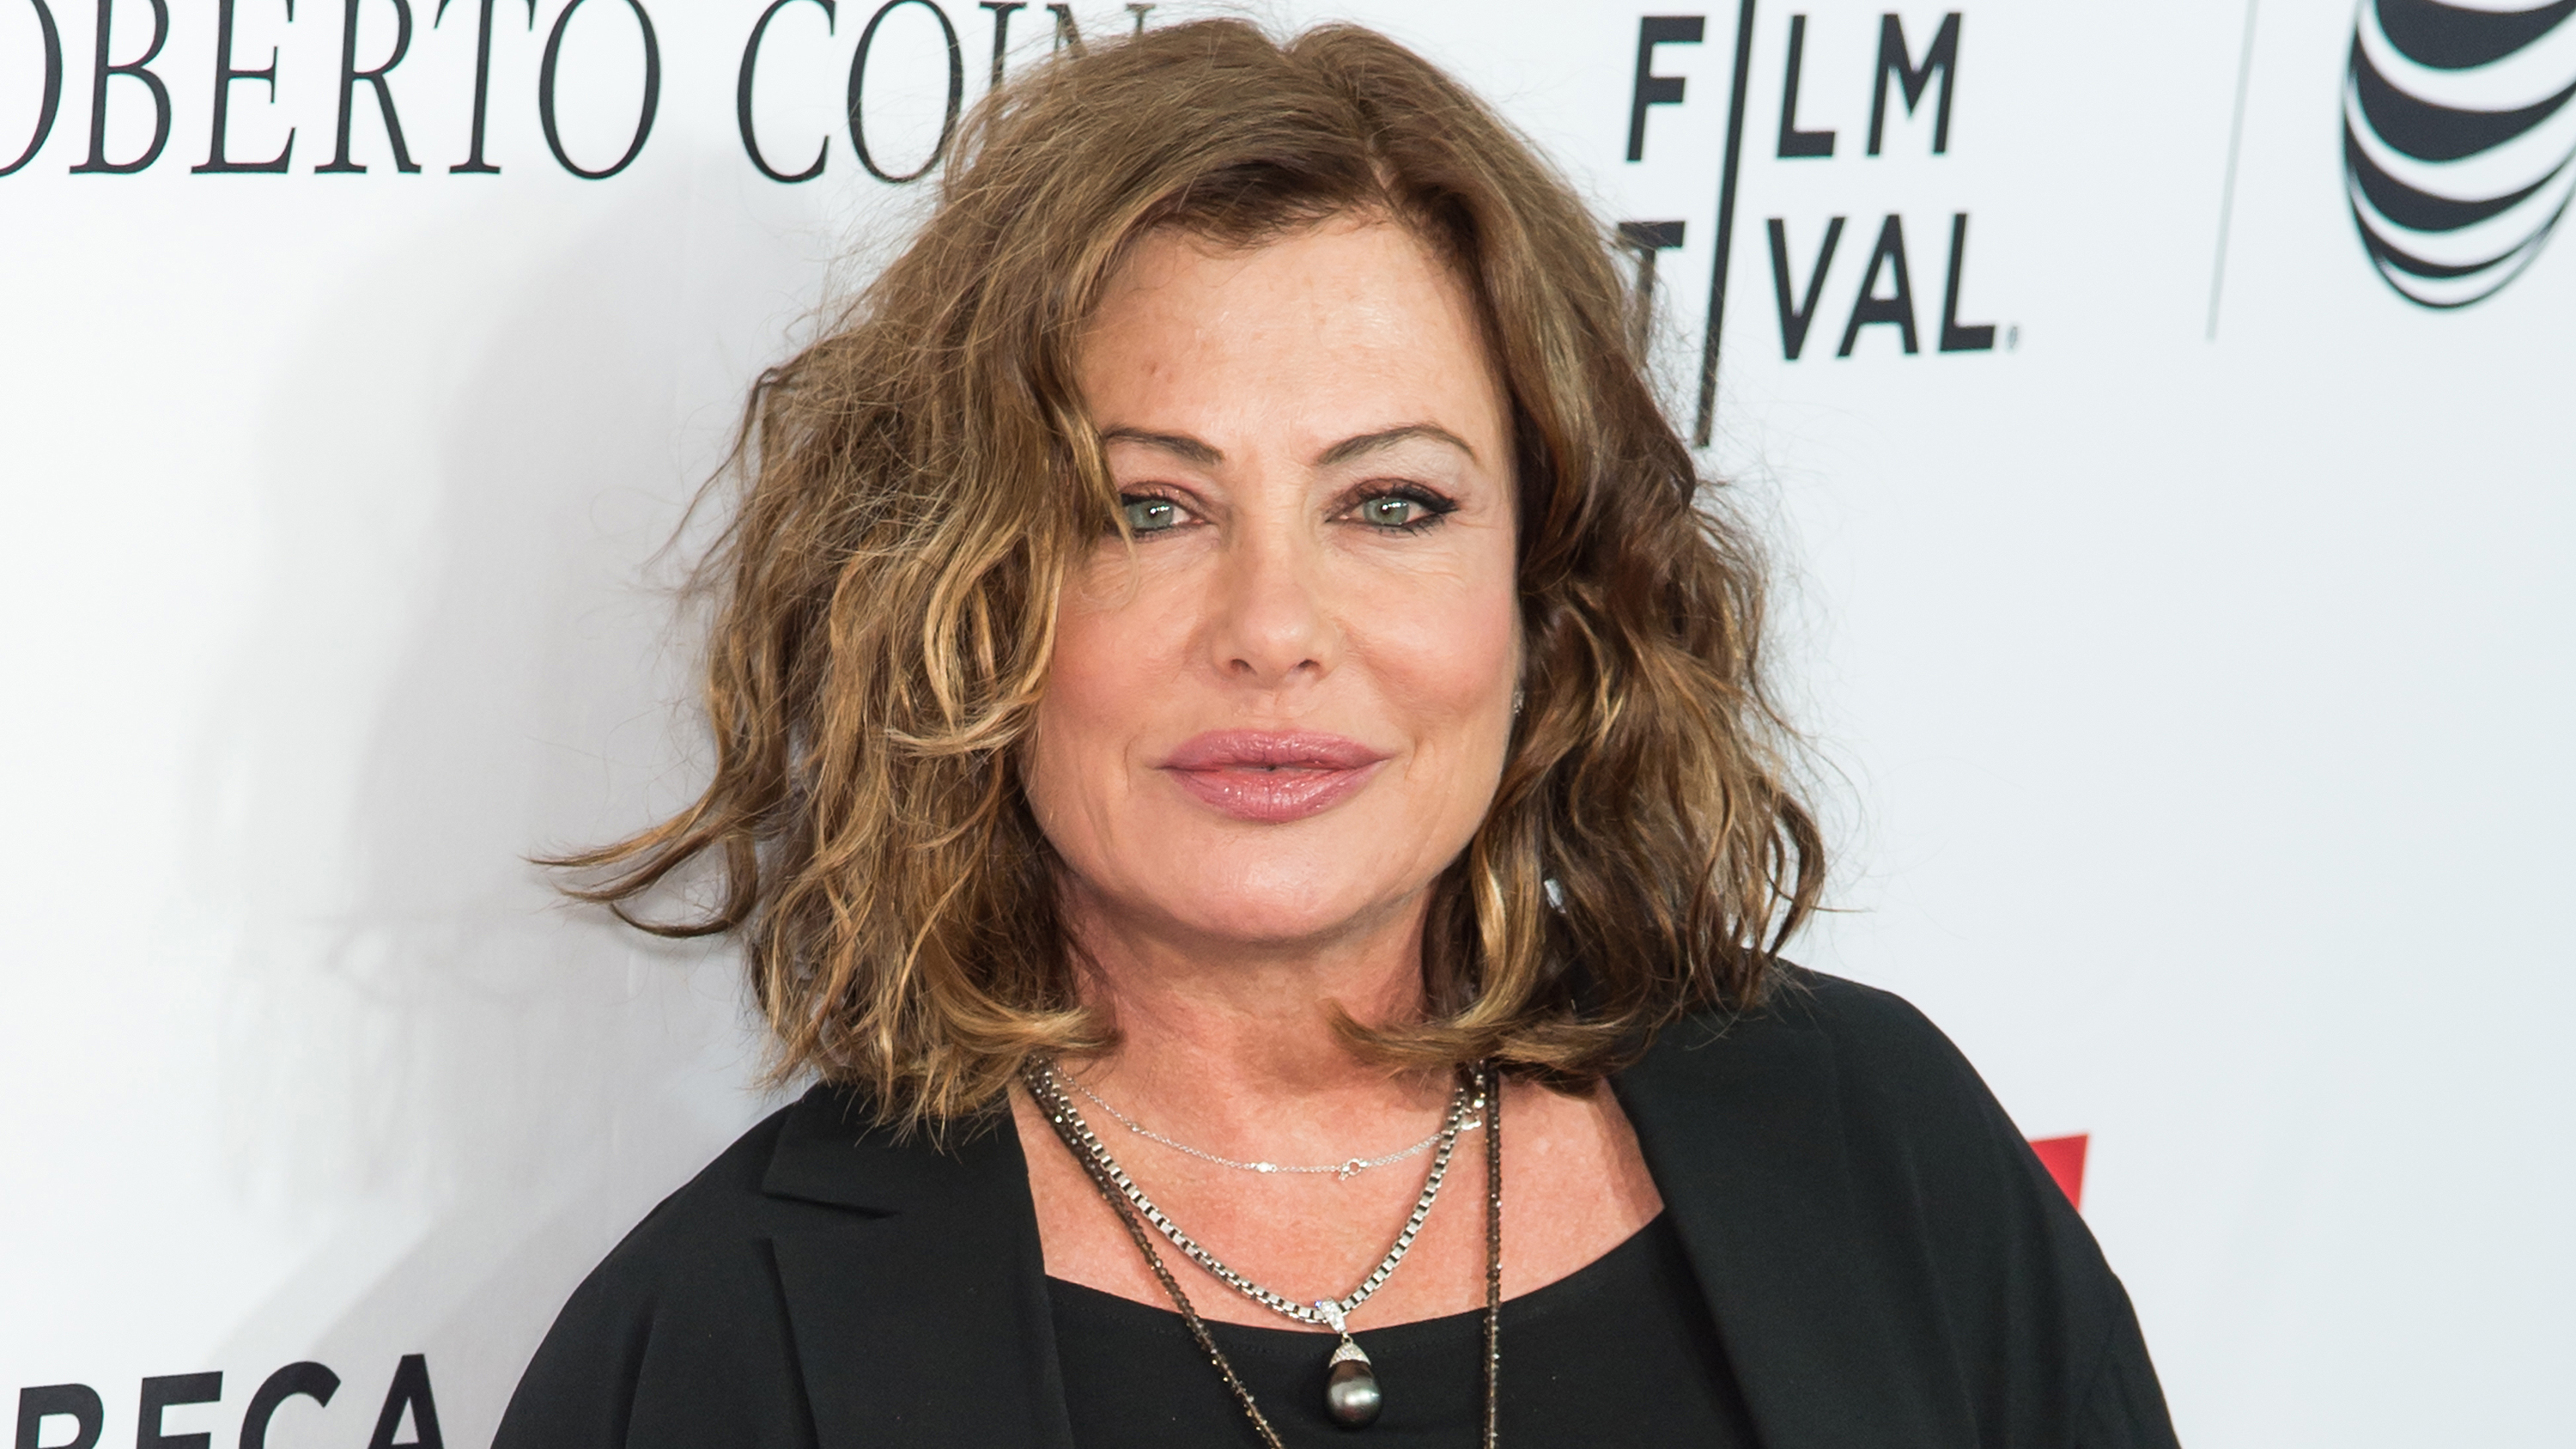 kelly lebrock then and now